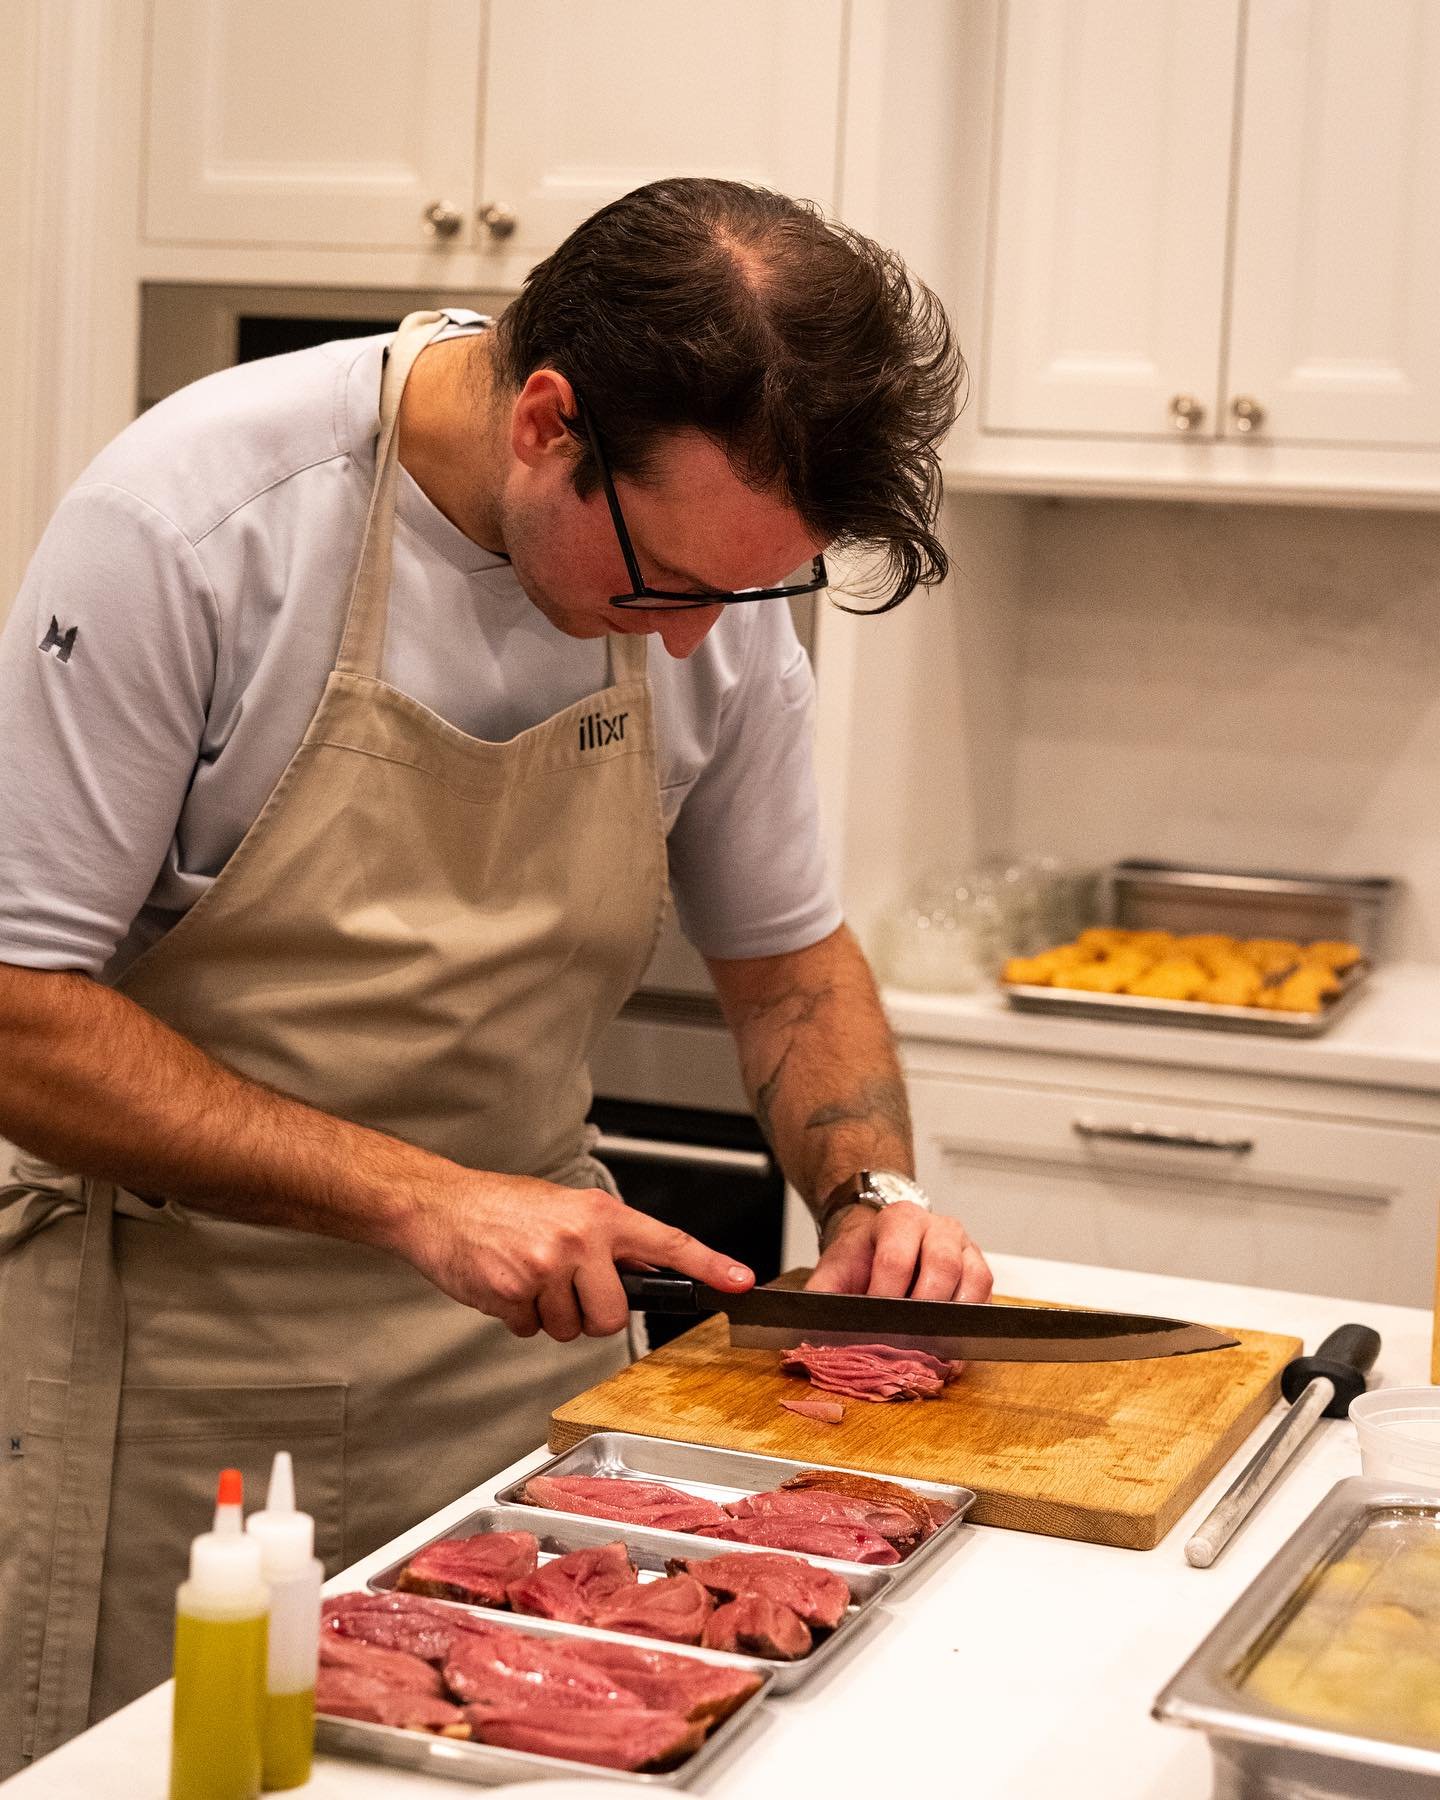 Chef de Cuisine, @shawn.clendening, making final preparations for a private dinner in the client&rsquo;s home.